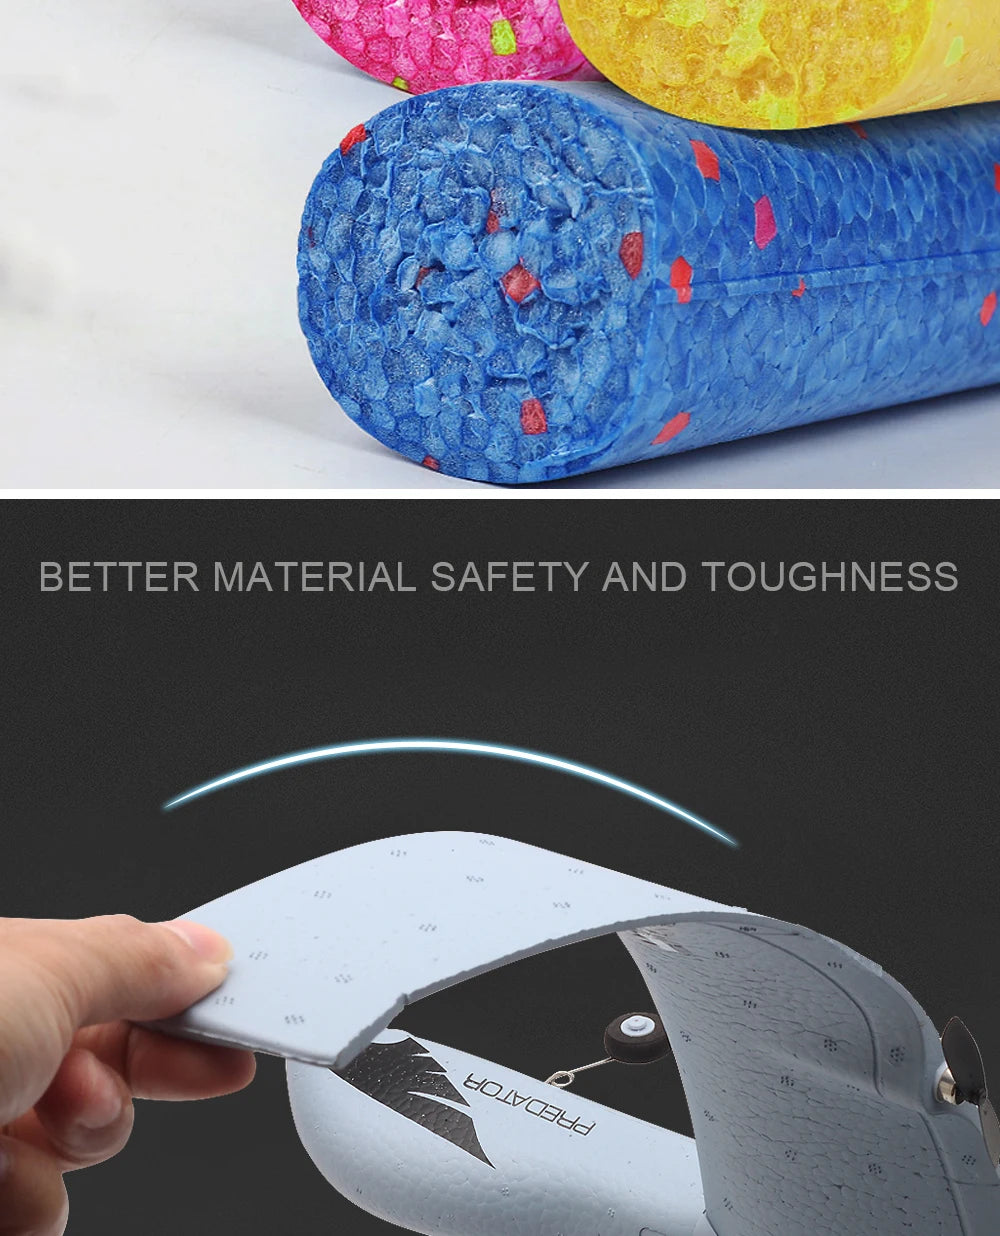 BETTER MATERIAL SAFETY AND TOUGHNESS HOLVO3